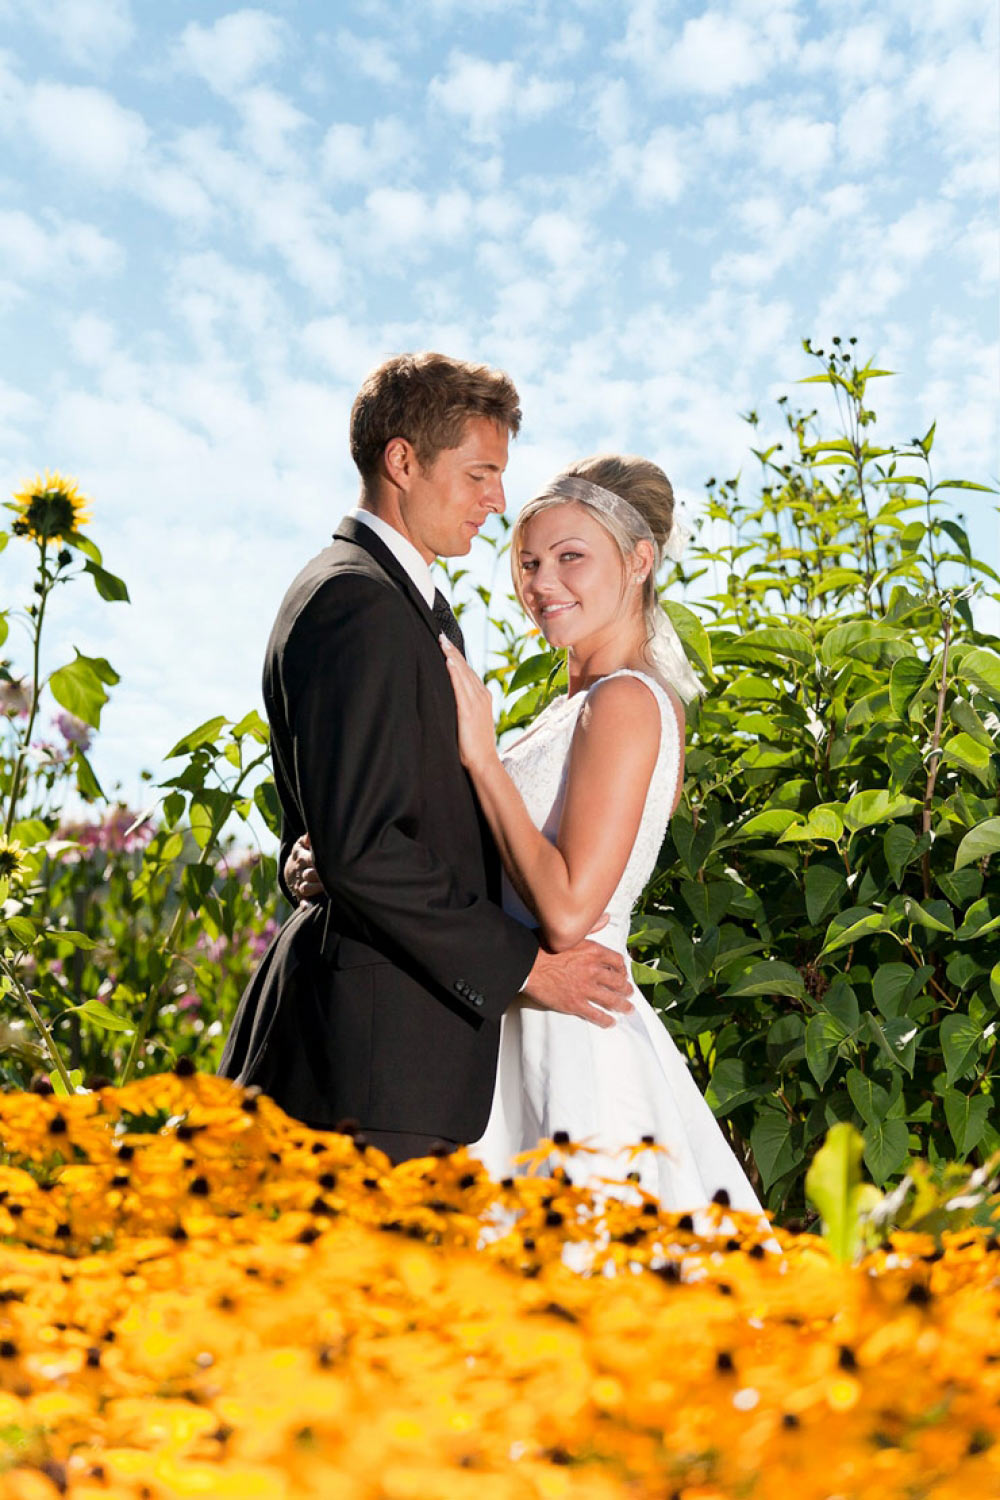 Get 50% off your wedding photography!